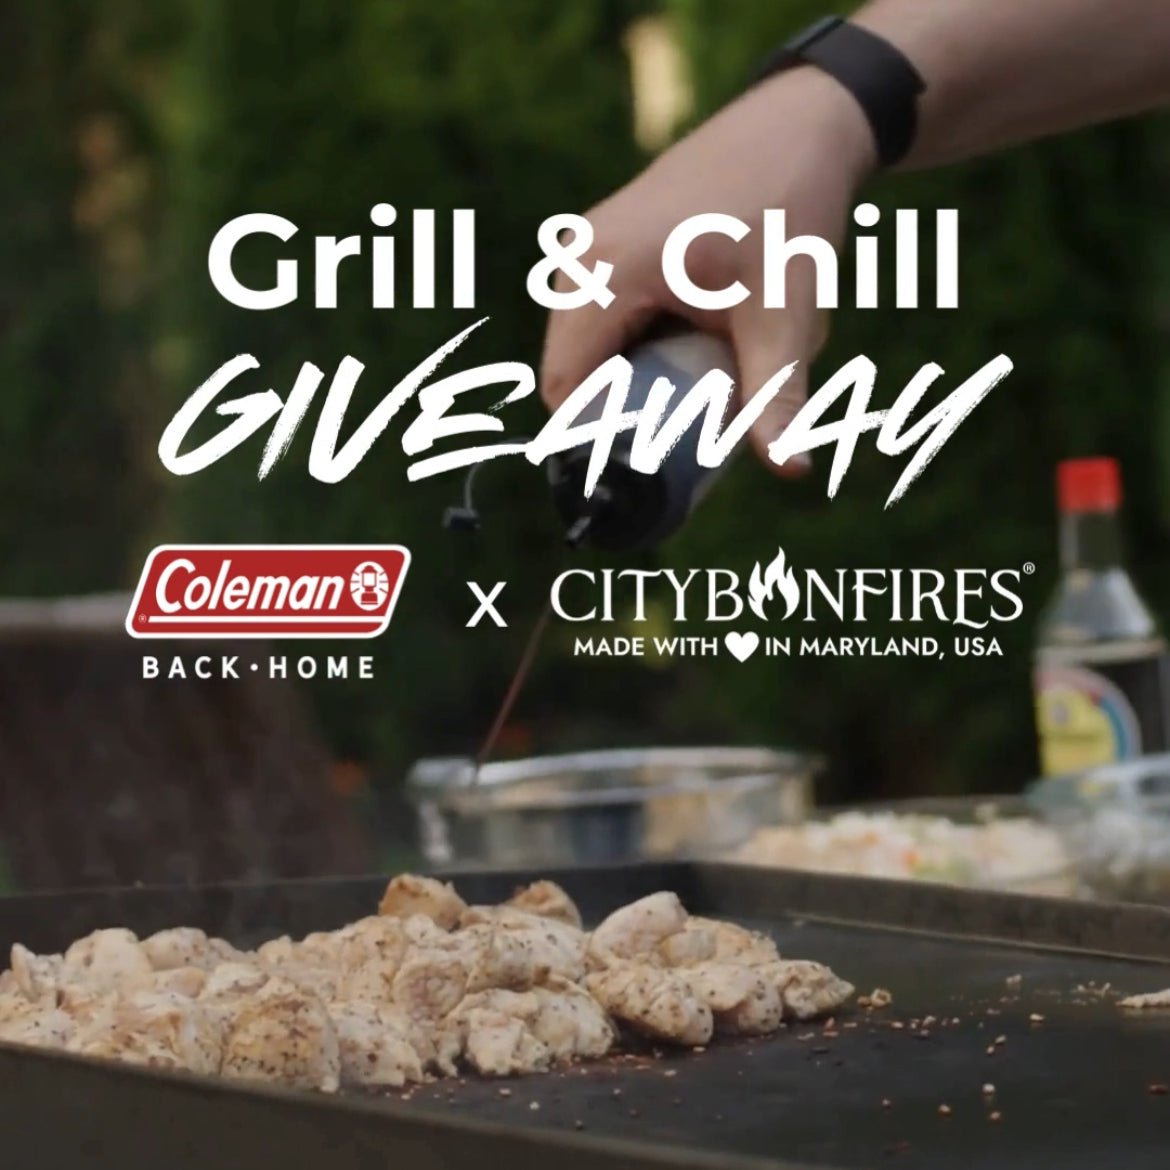 Enter to Win the Coleman Back Home x City Bonfires Grill + Chill Giveaway - City Bonfires